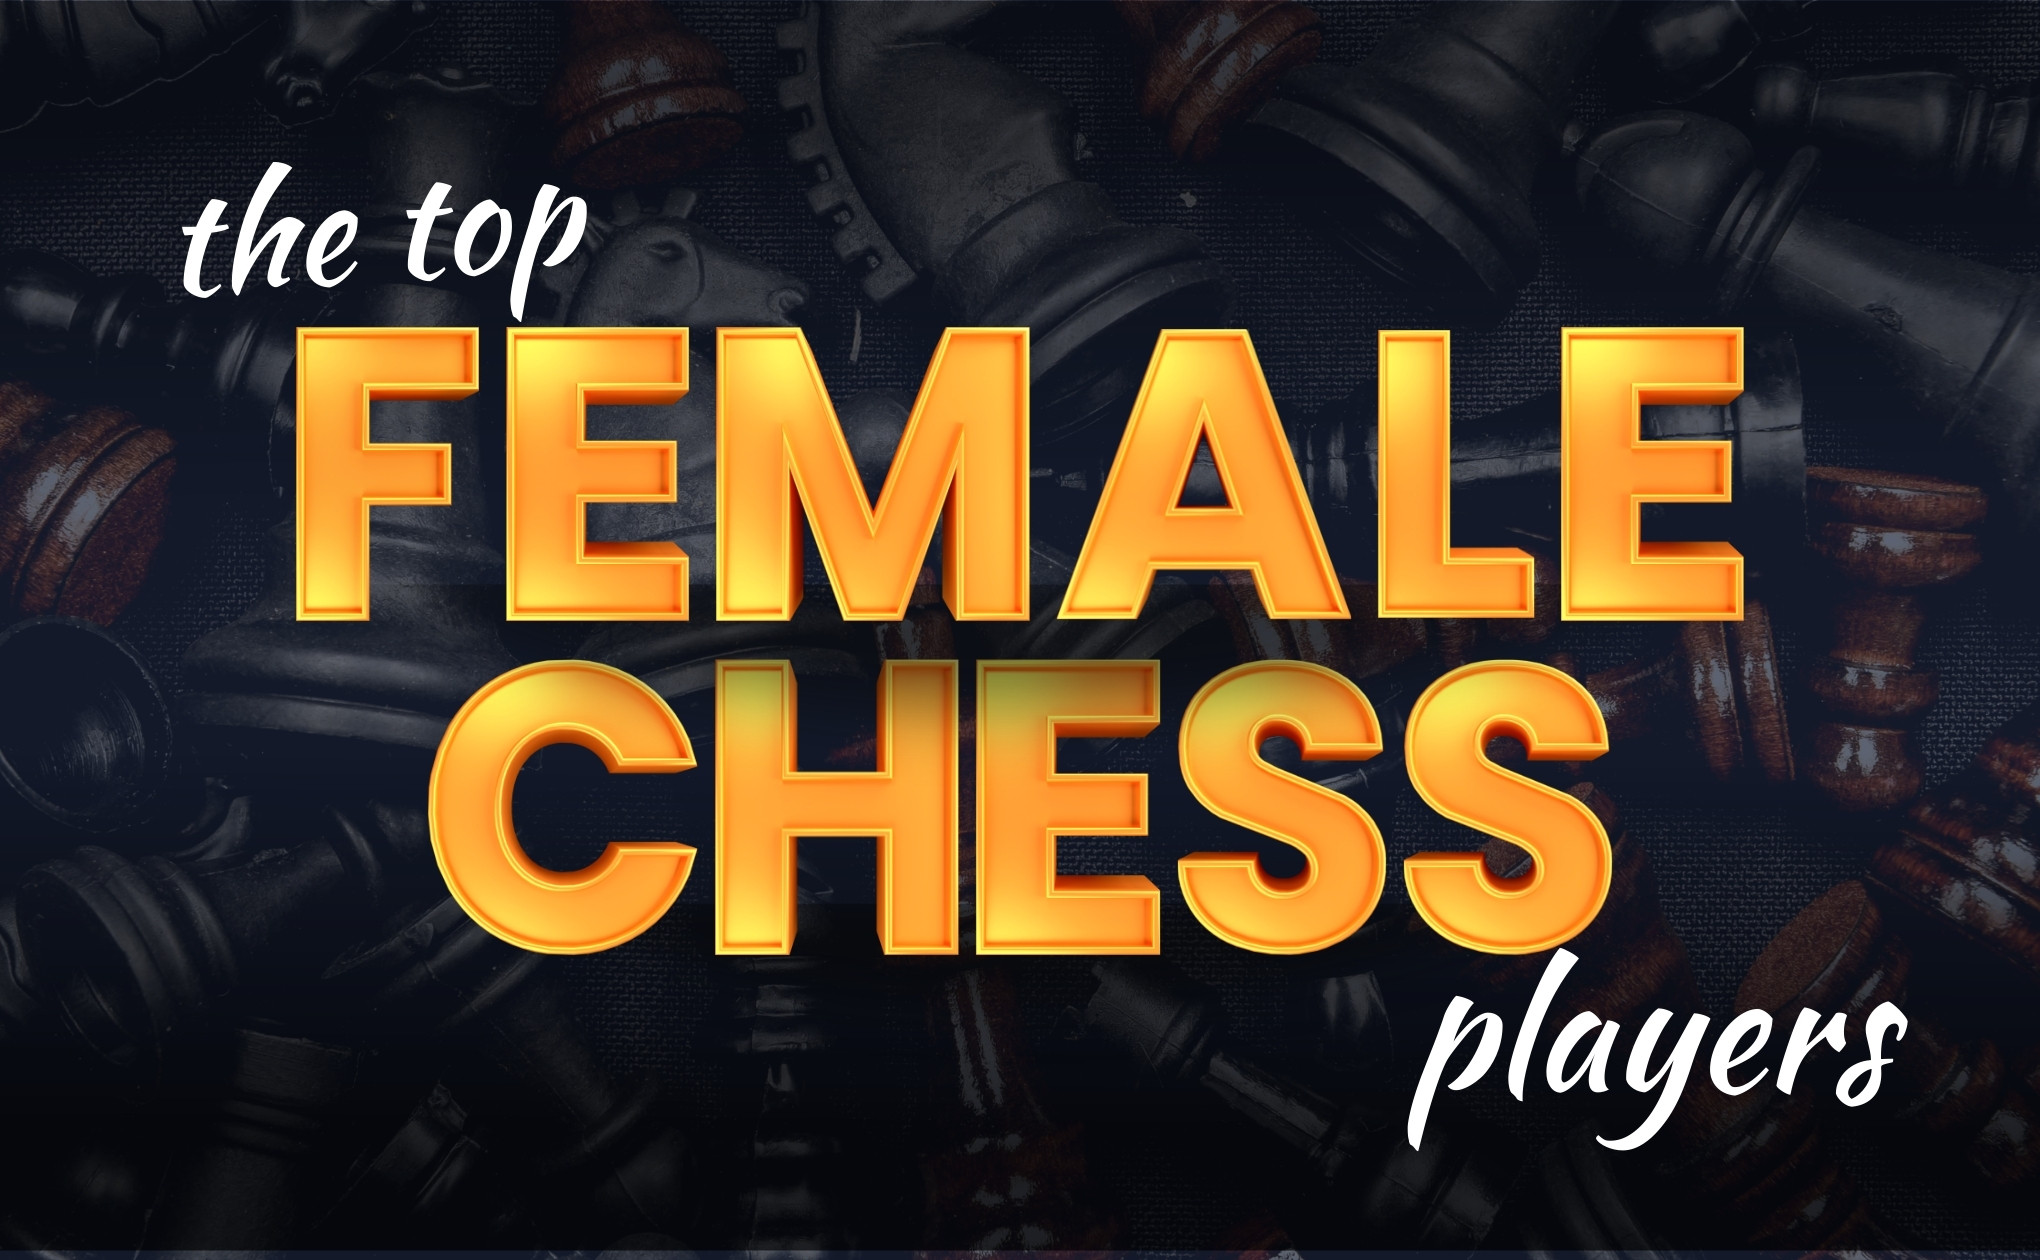 the top female chess players